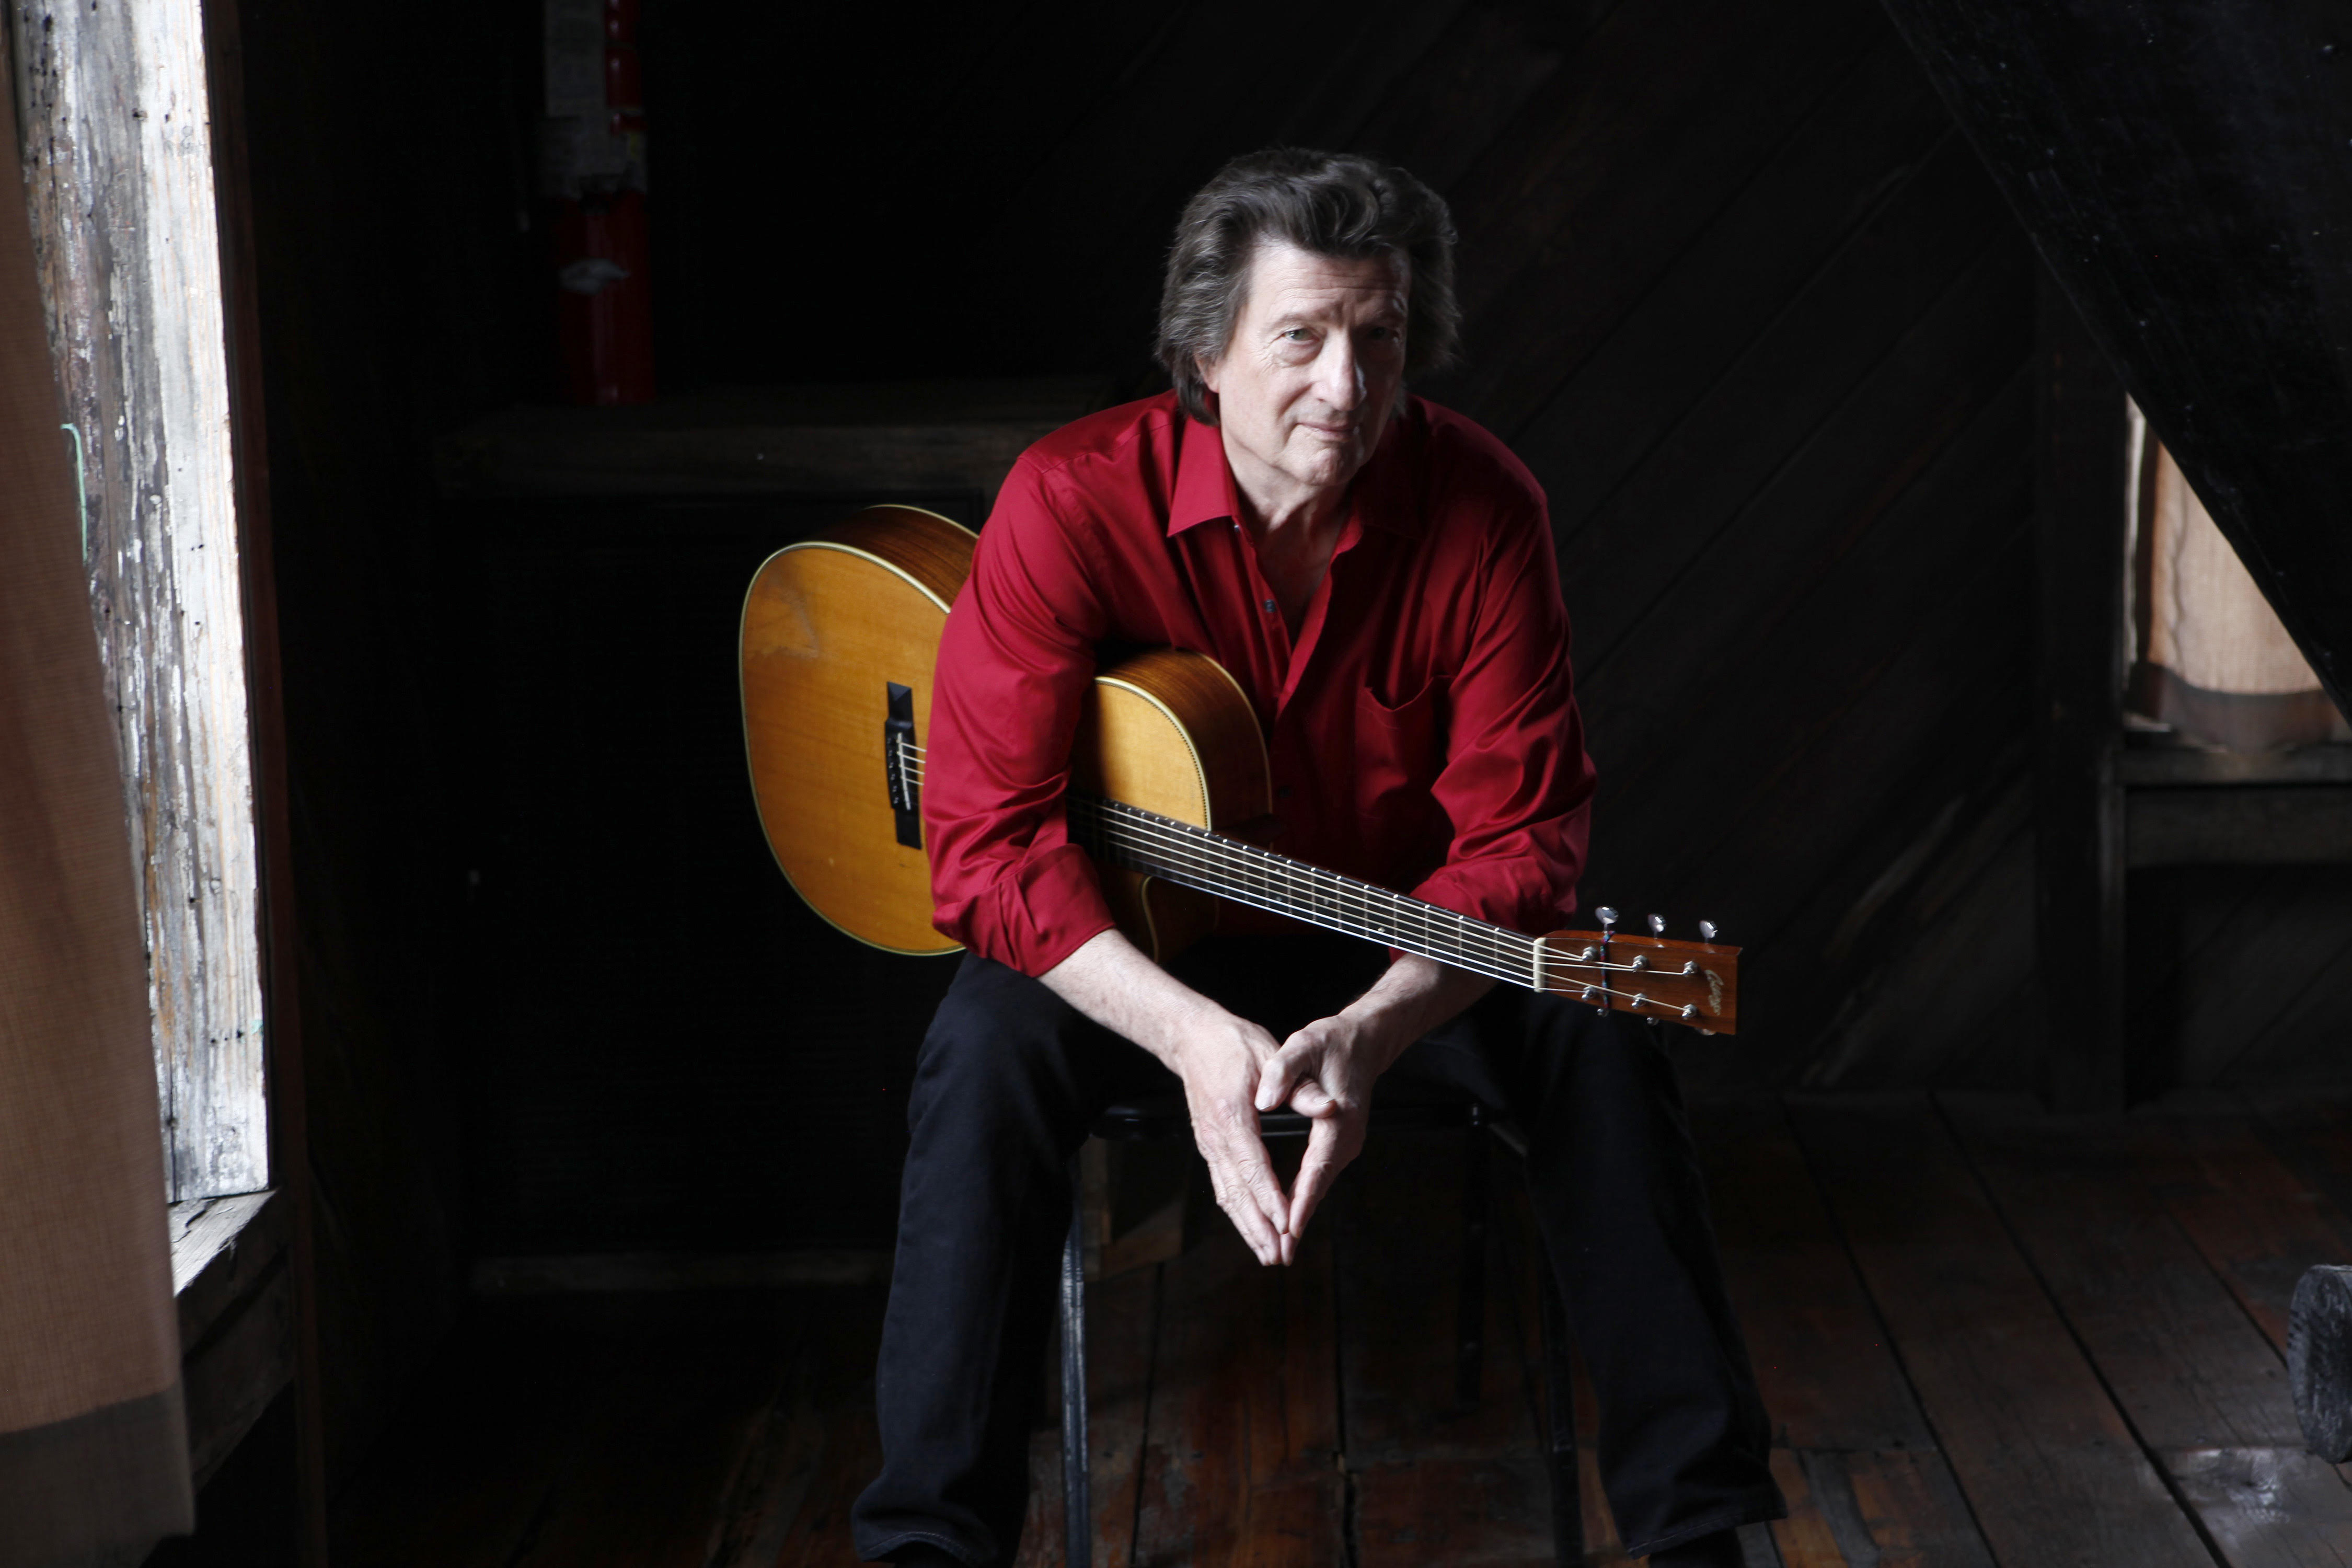 Folk and blues legend Chris Smither on songwriting, Chuck Berry, and living in the Pioneer Valley